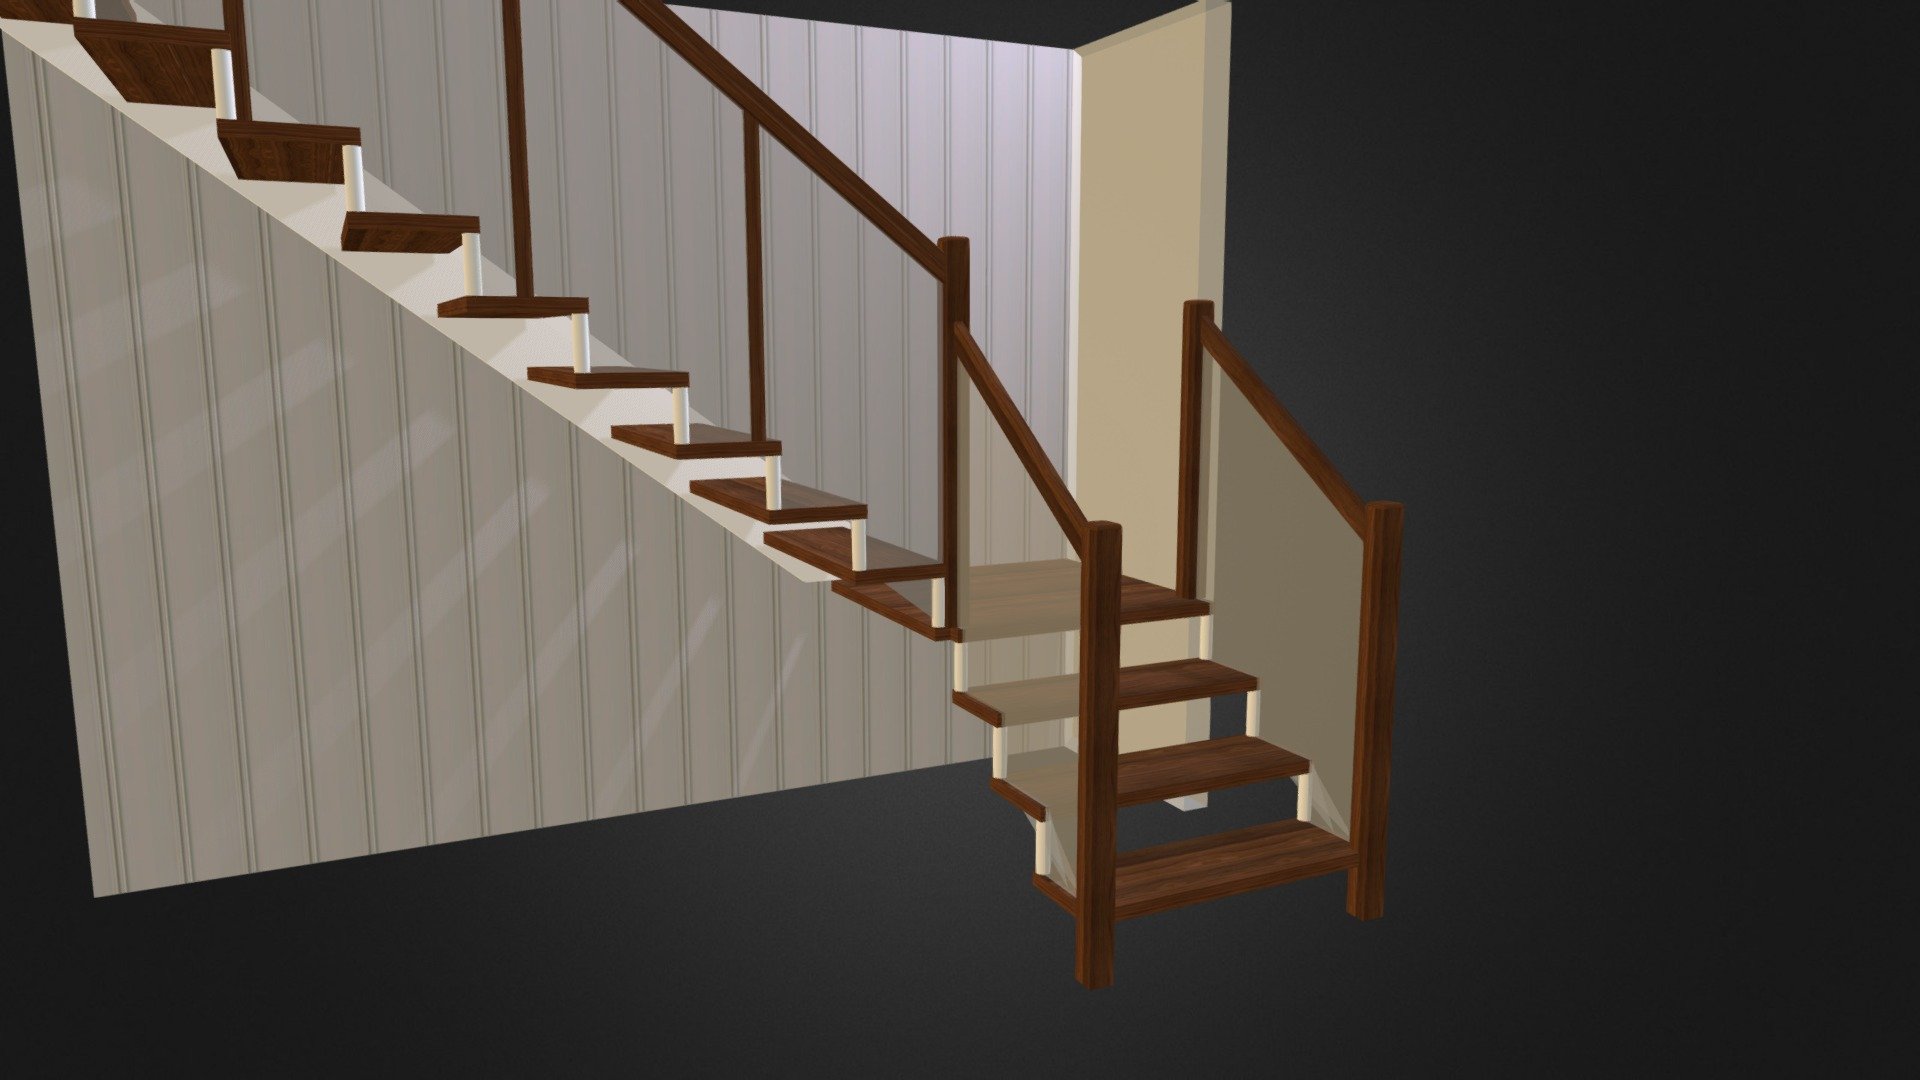 http:staircon.com
Export by Consultec (TVe) (lic 1314) - Stair Glass rail - 3D model by Sweden 3d model